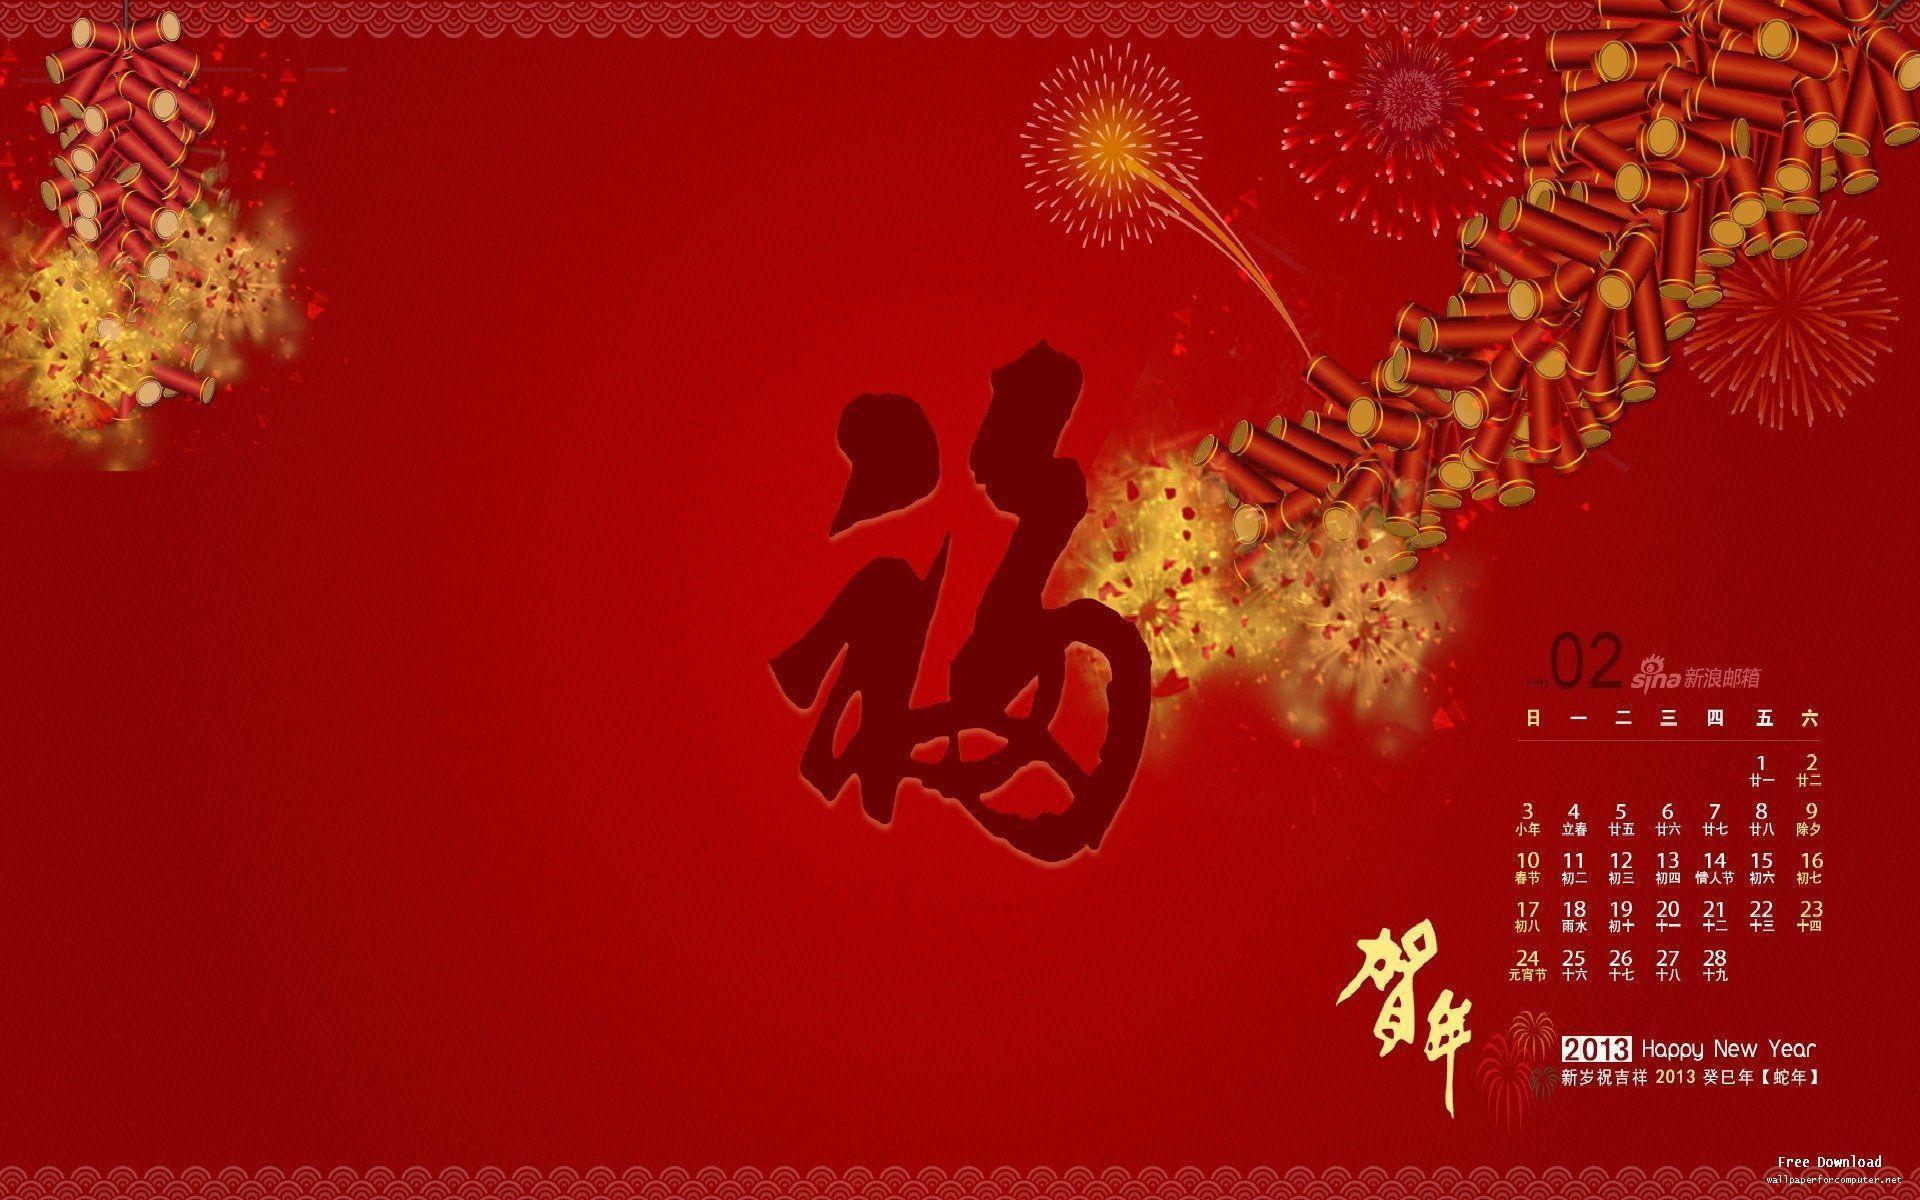 Chinese New Year Theme For Computer Wallpaper. High